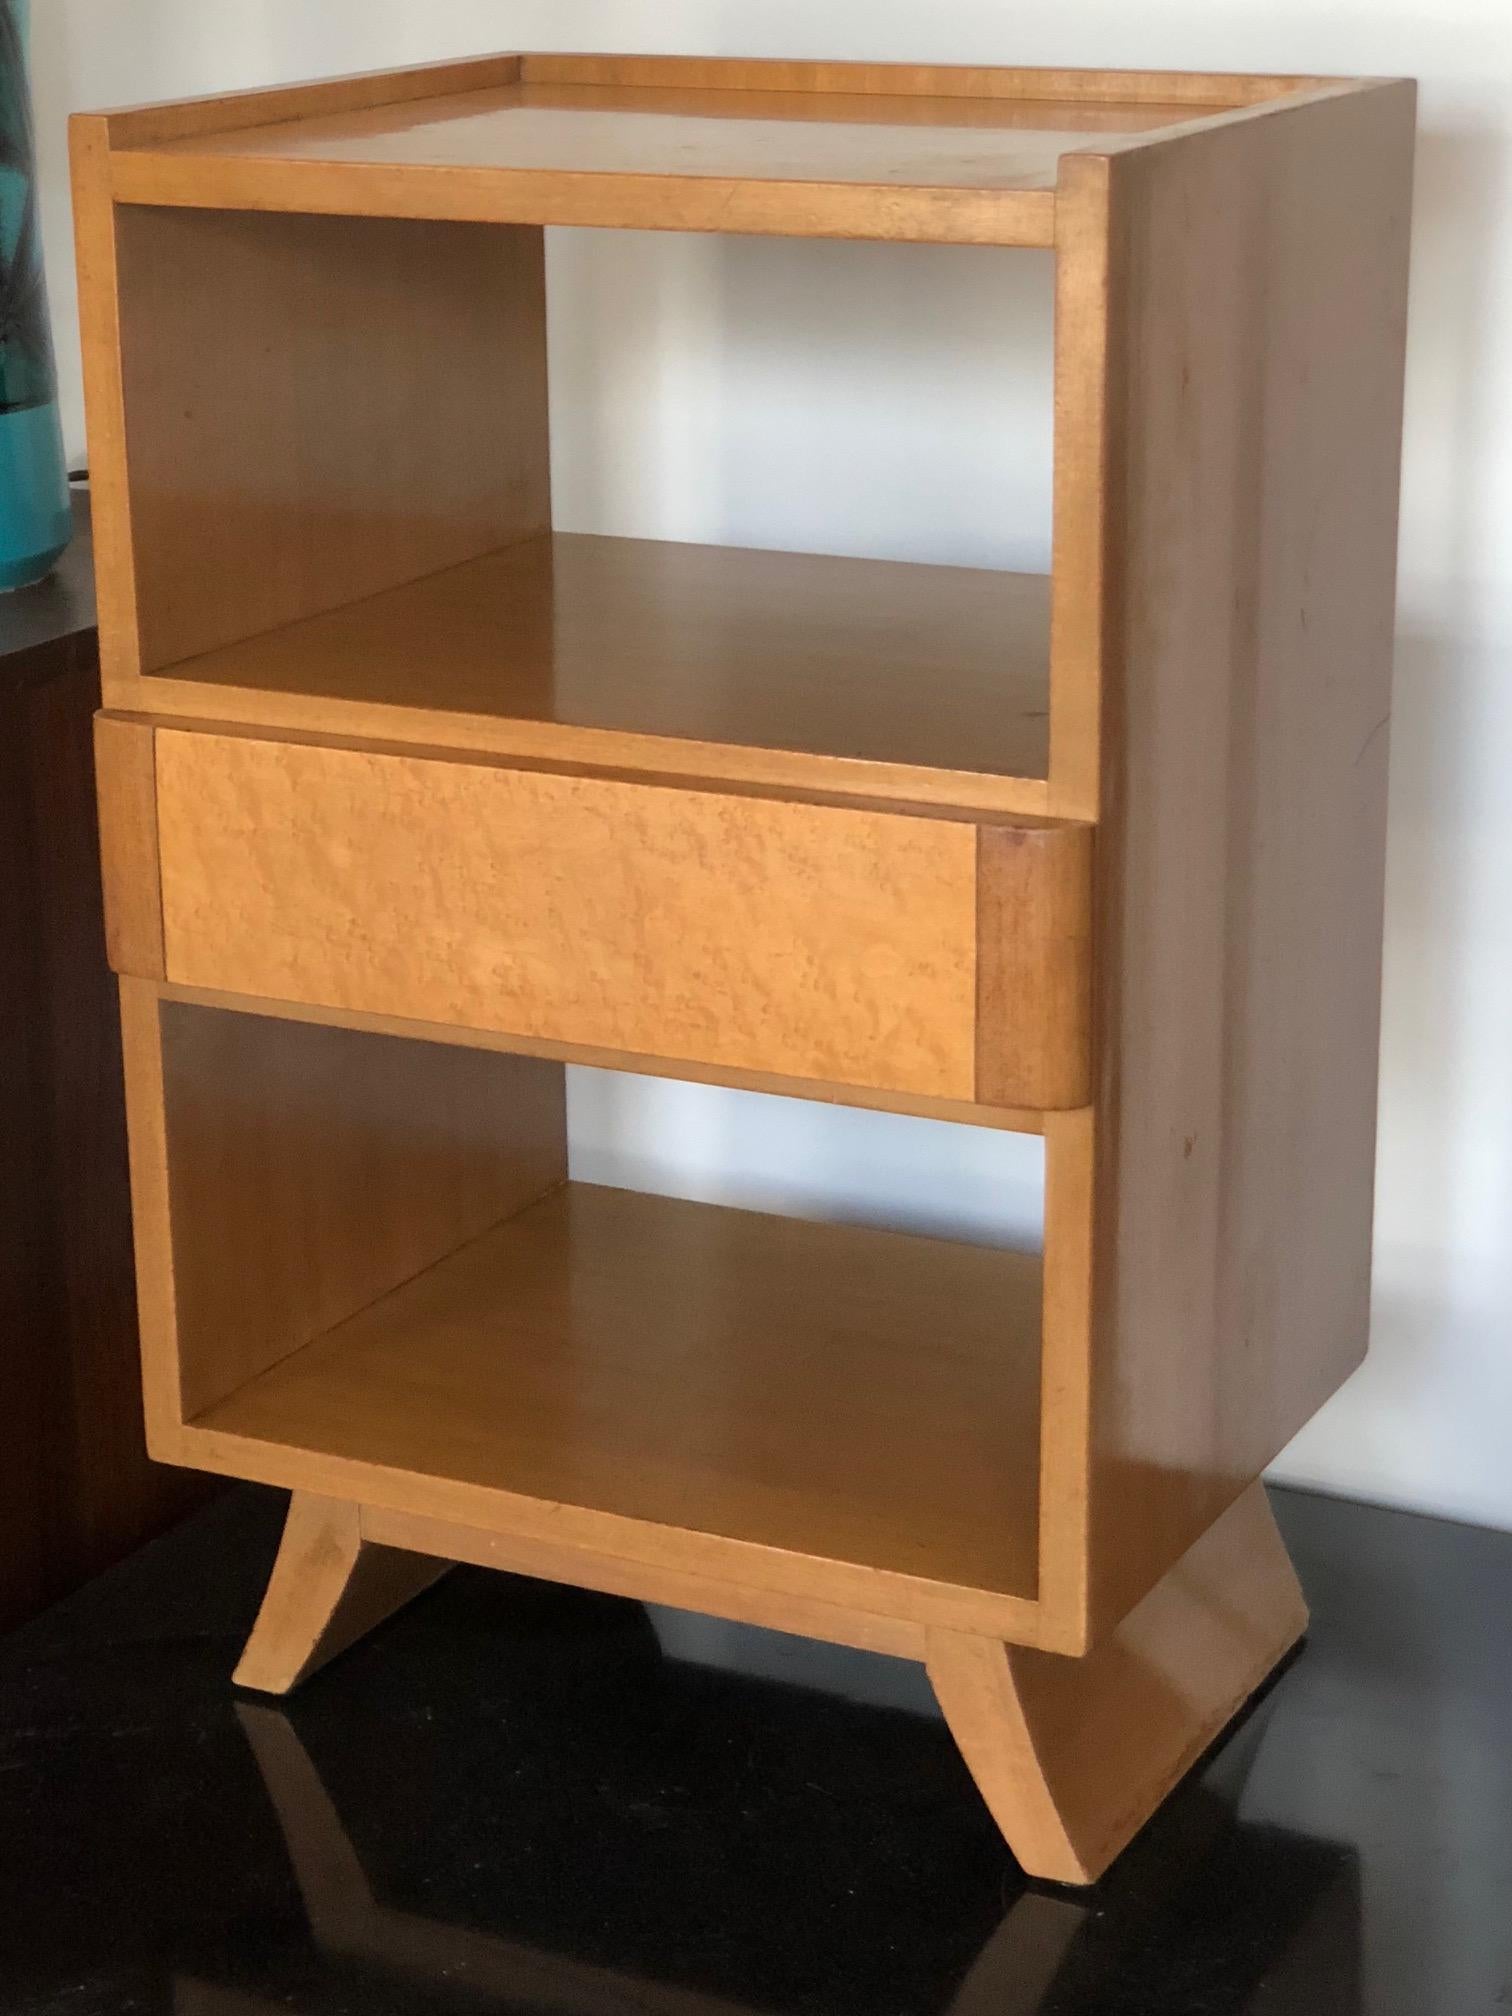 An interesting pair of nightstands by E.Saarinen for Northern Furniture/RWAY in walnut/bird's-eye maple. Single drawer with open-cut-out space above and below allowing these to be placed anywhere in the room. Architectural construction with